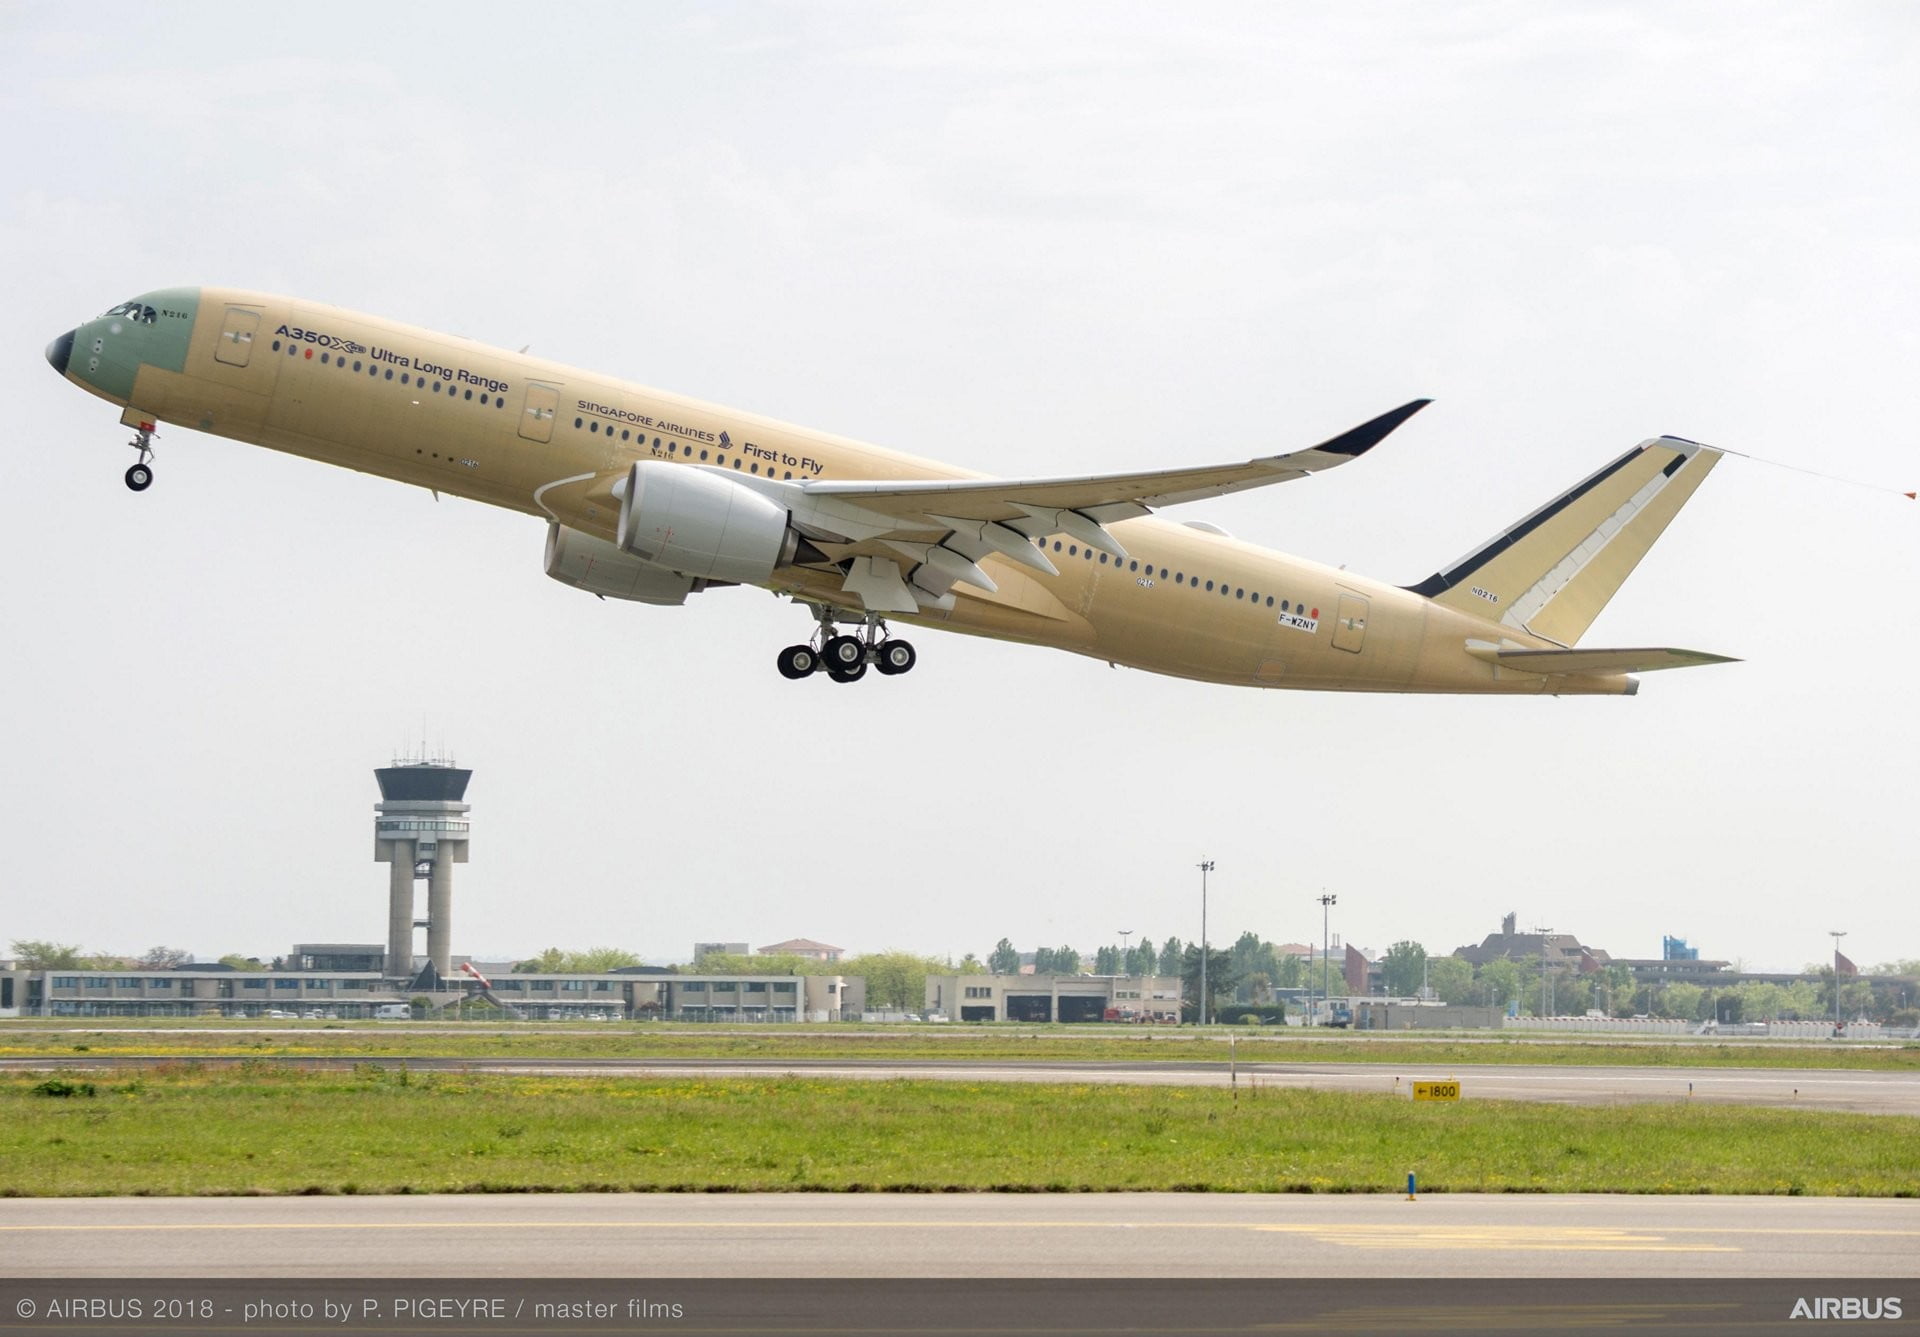 Airbus' Latest A350 Aircraft to Break Record for Longest Commercial ...